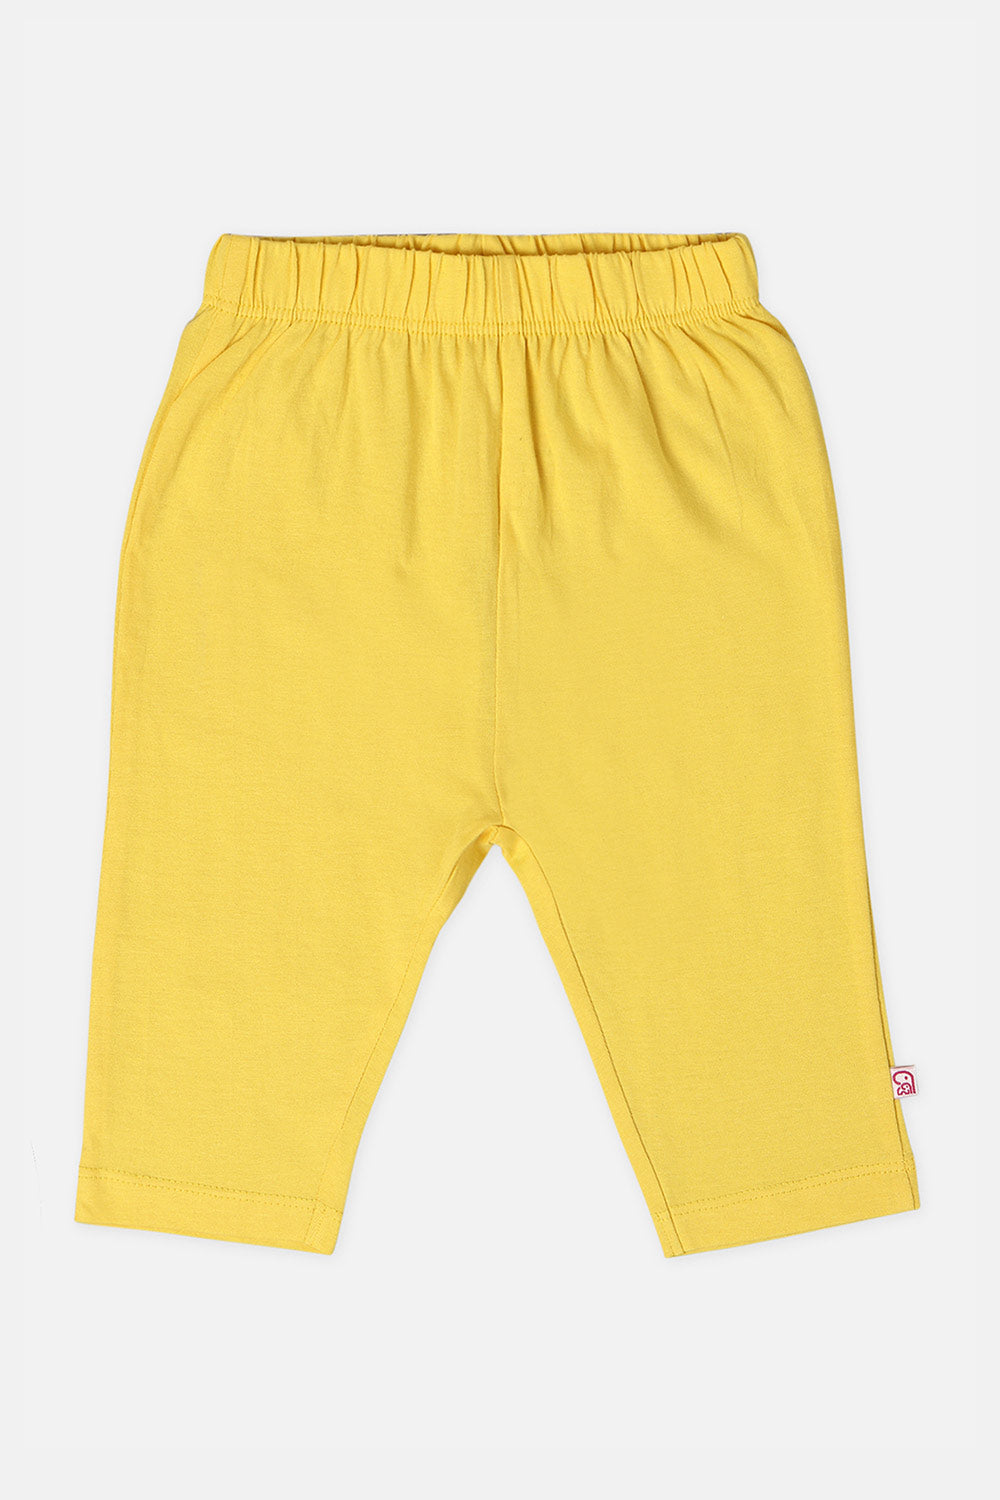 Oh Baby Comfy Pant Yellow-Tr02